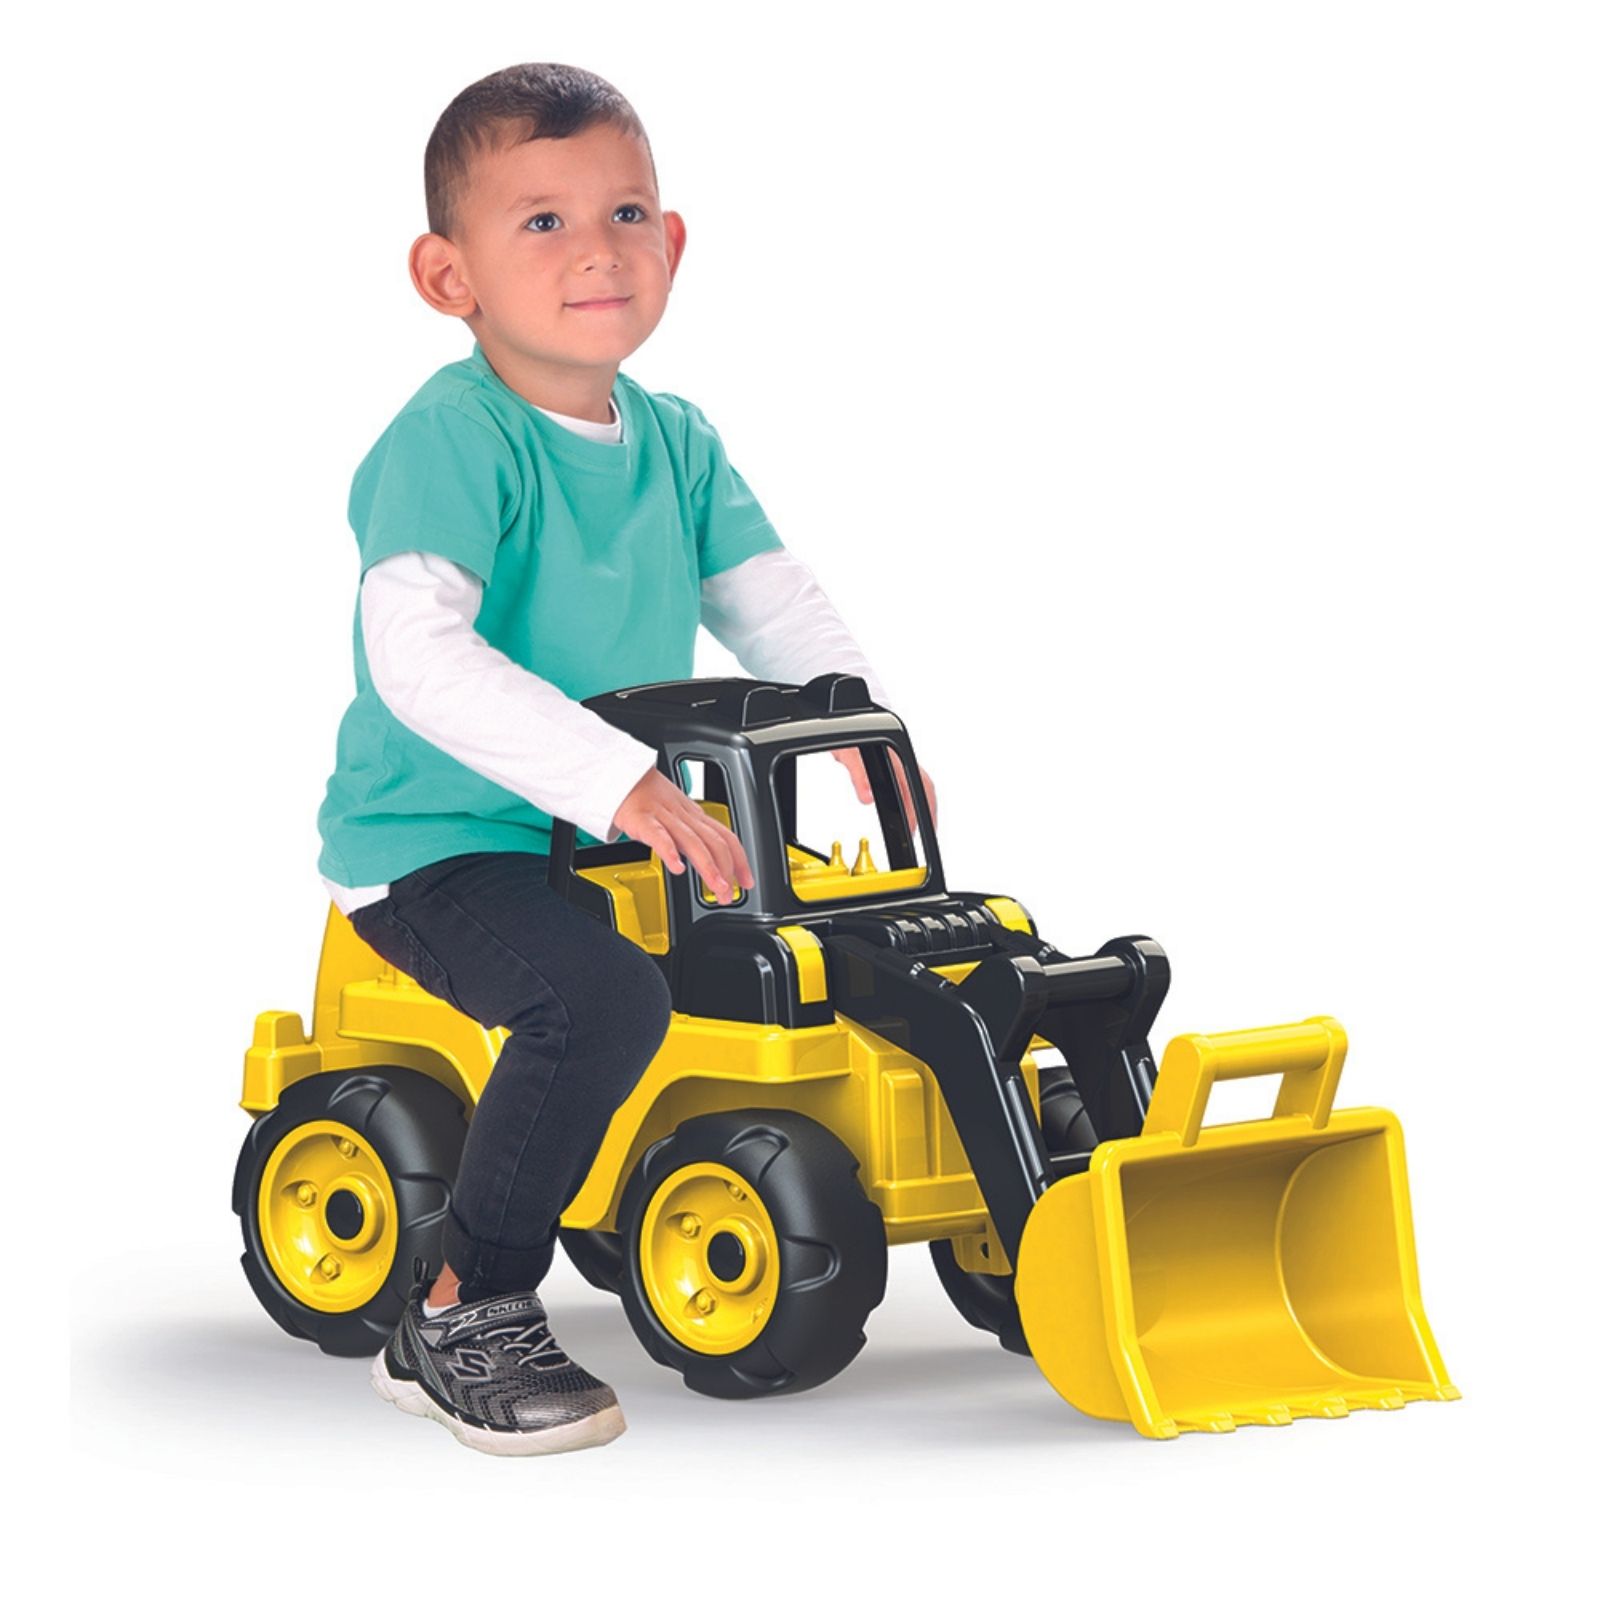 Giant Ride-On Loader Truck - Yellow and Black (2 - 6 Years)